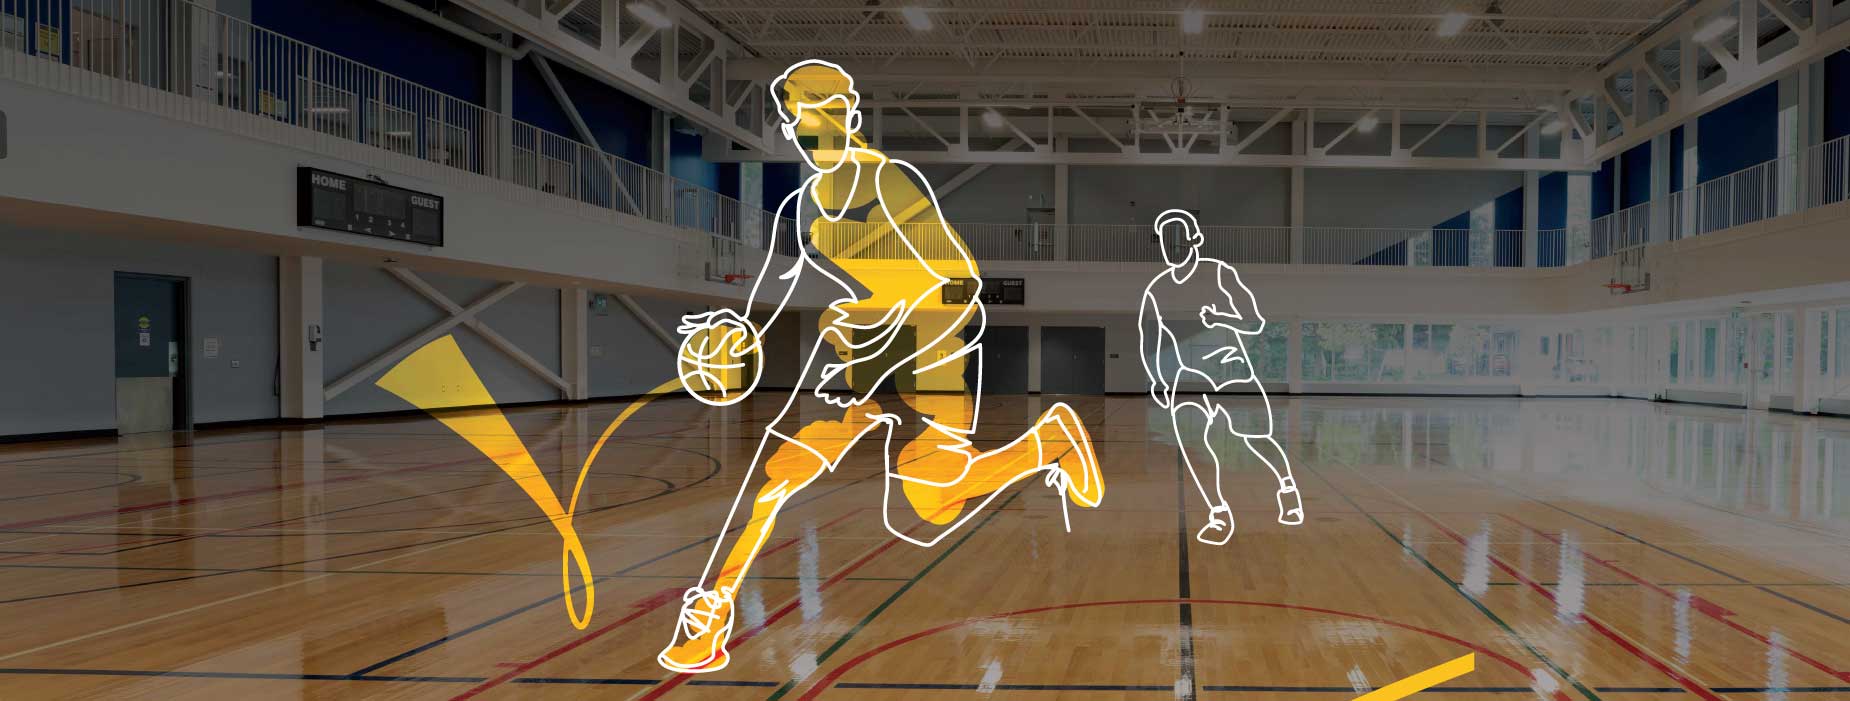 Photo of a gymnasium at a town recreation facility overlayed with an illustration of two people playing basketball.